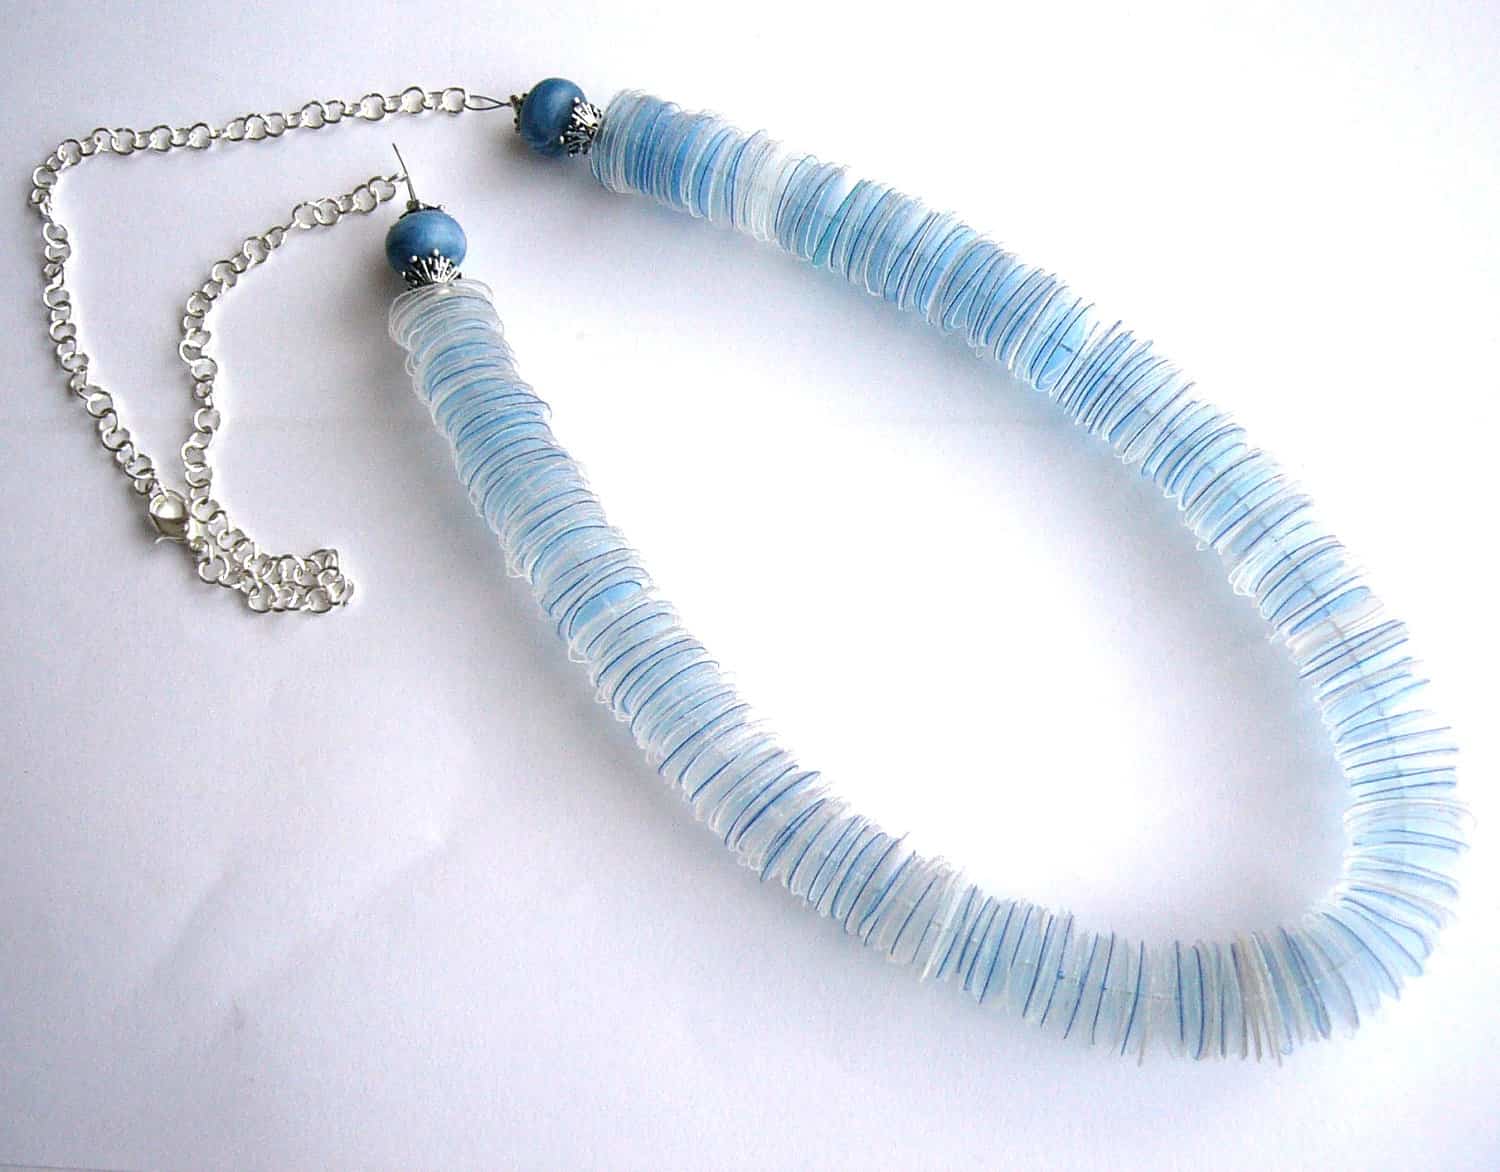 Recycled plastic bottle jewelry